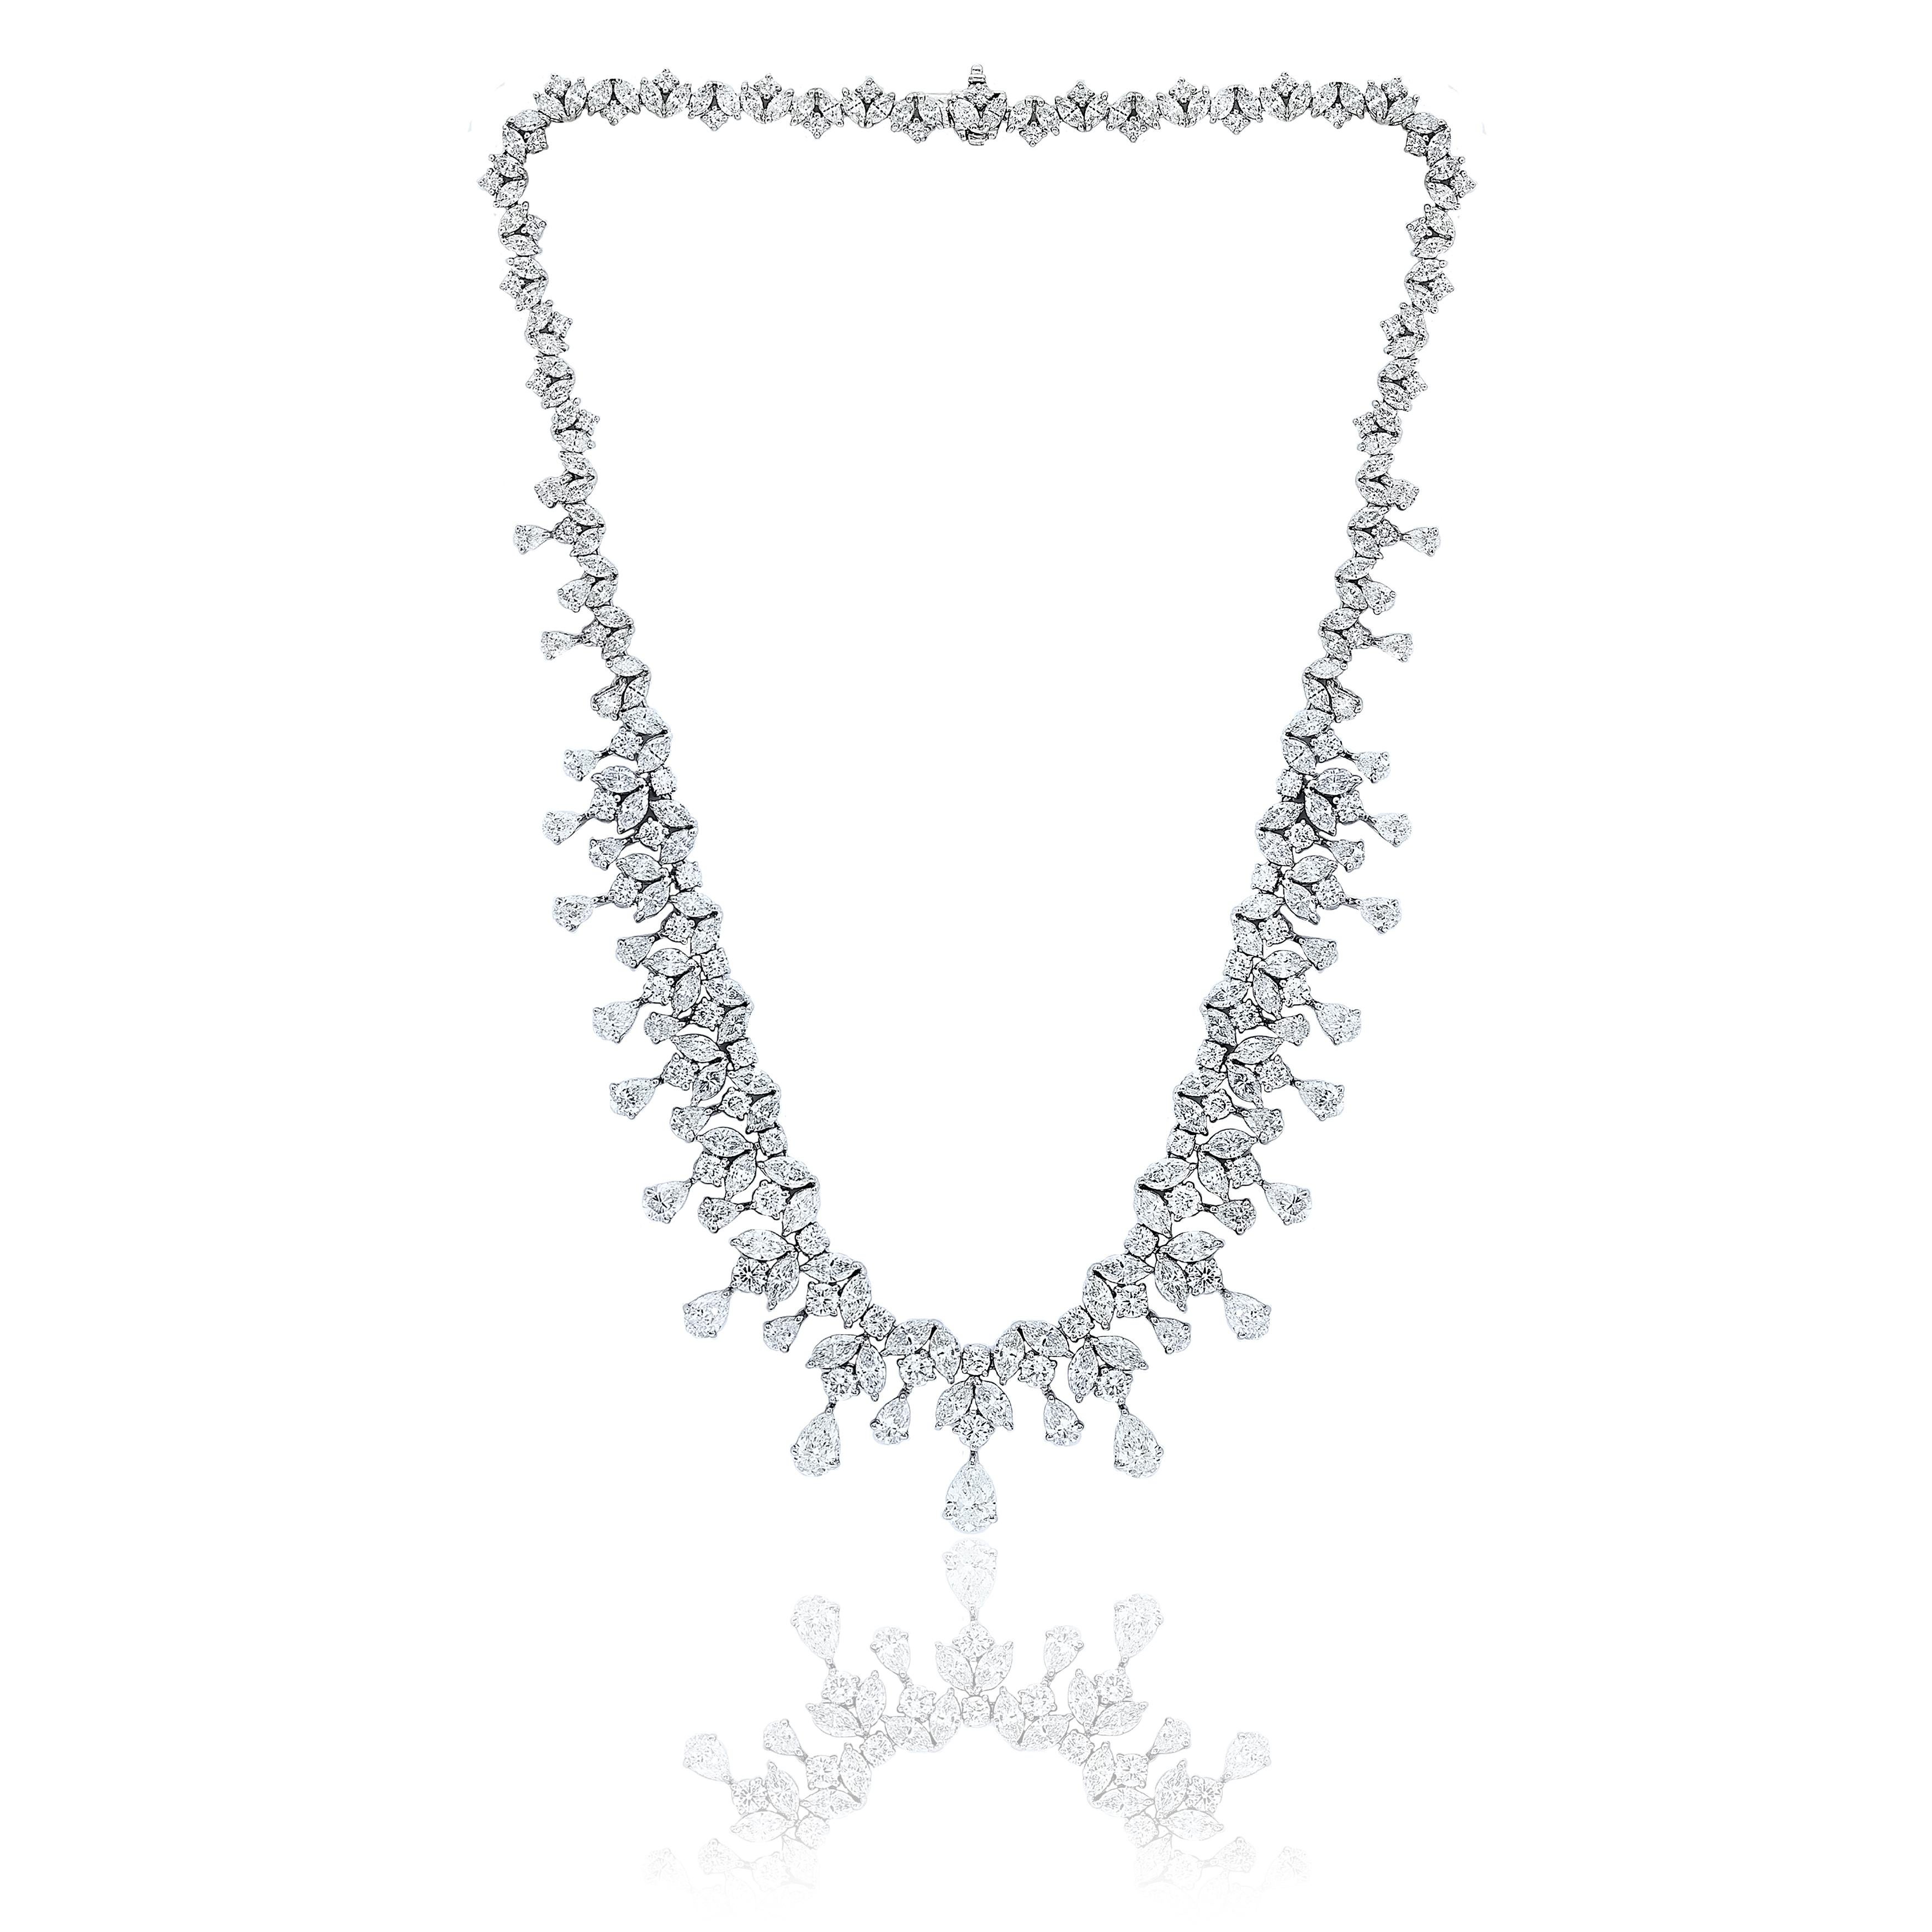 An important and brilliant necklace showcasing 43.23 carats of mixed cut diamonds, set in an intricate and fringe design. Made in 18 karats white gold. Intricate and creative design, one-of-a-kind piece.

Style available in different price ranges.